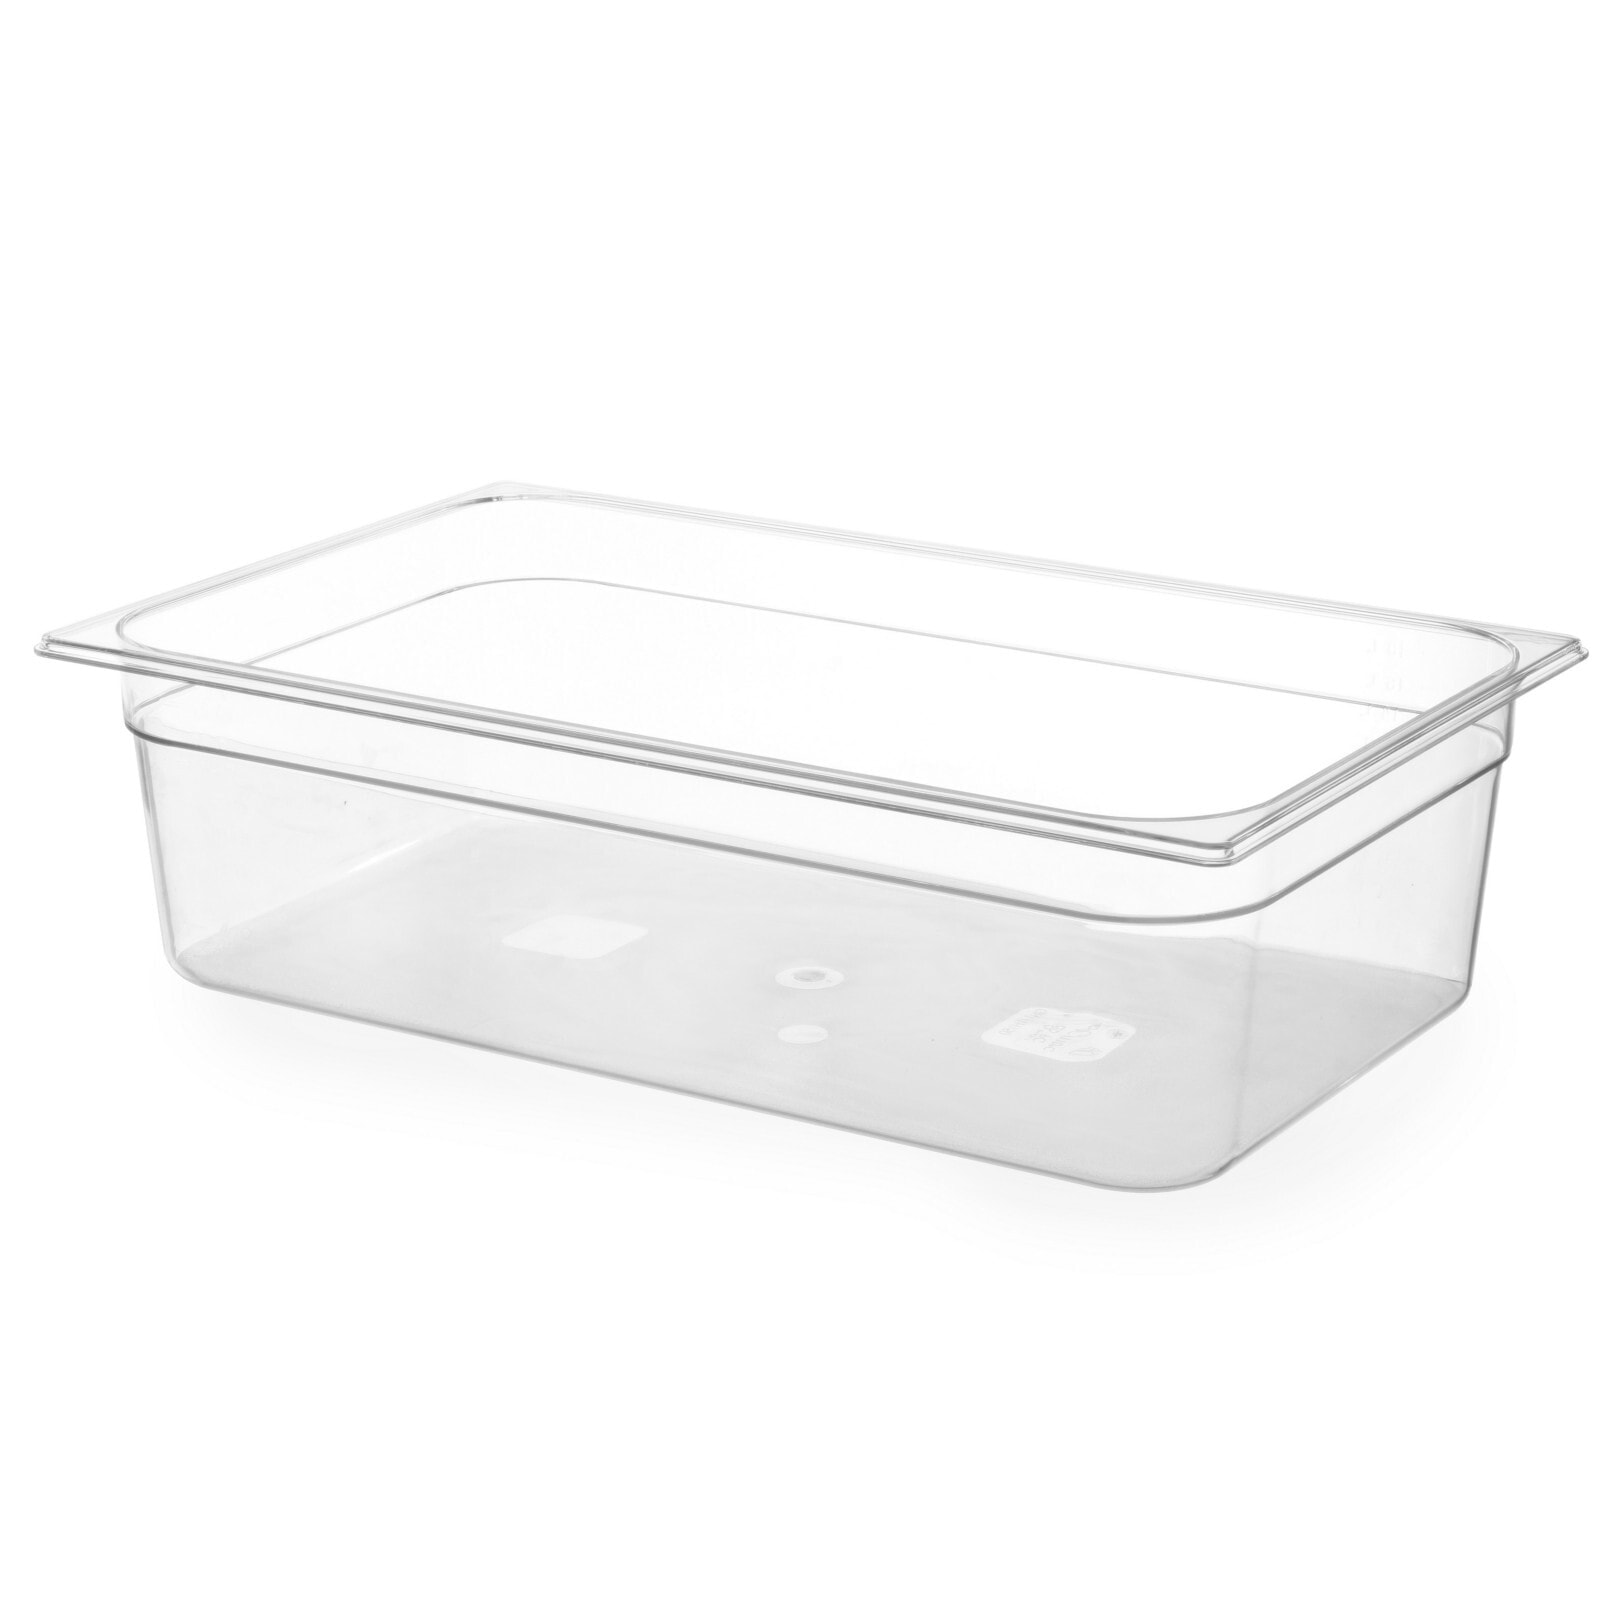 Transparent GN container made of polycarbonate GN 1/1, height 65 mm - Hendi 861233